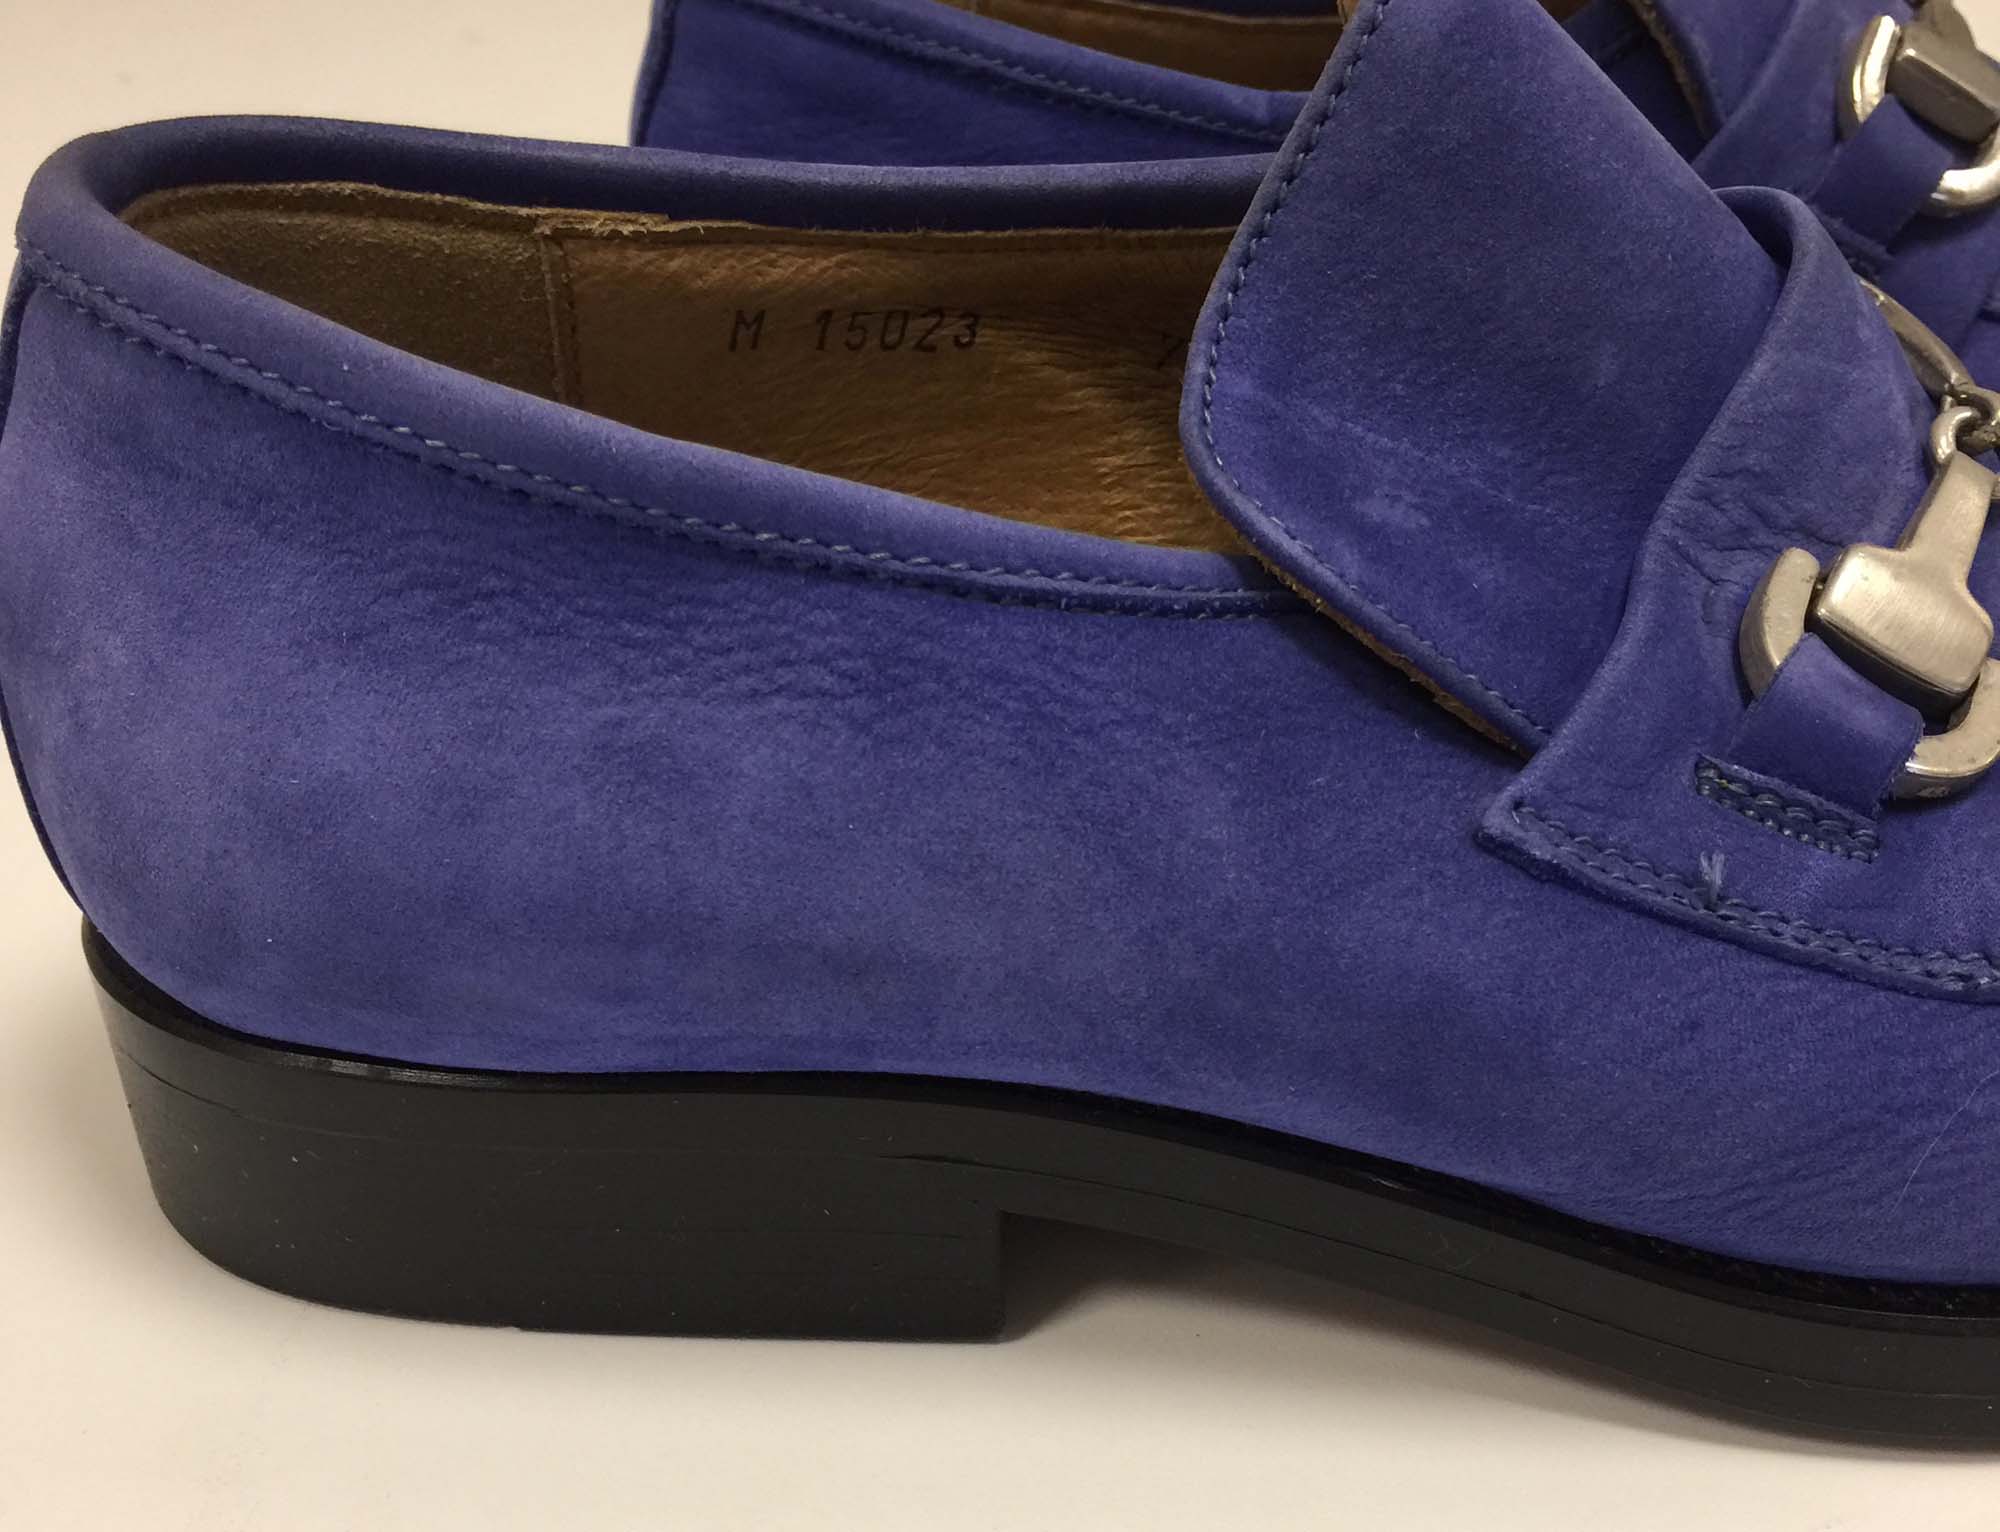 ROCK & ROLL MUSEUM DENMARK - CARL PERKINS' BLUE SUEDE SHOES. - Image 4 of 5